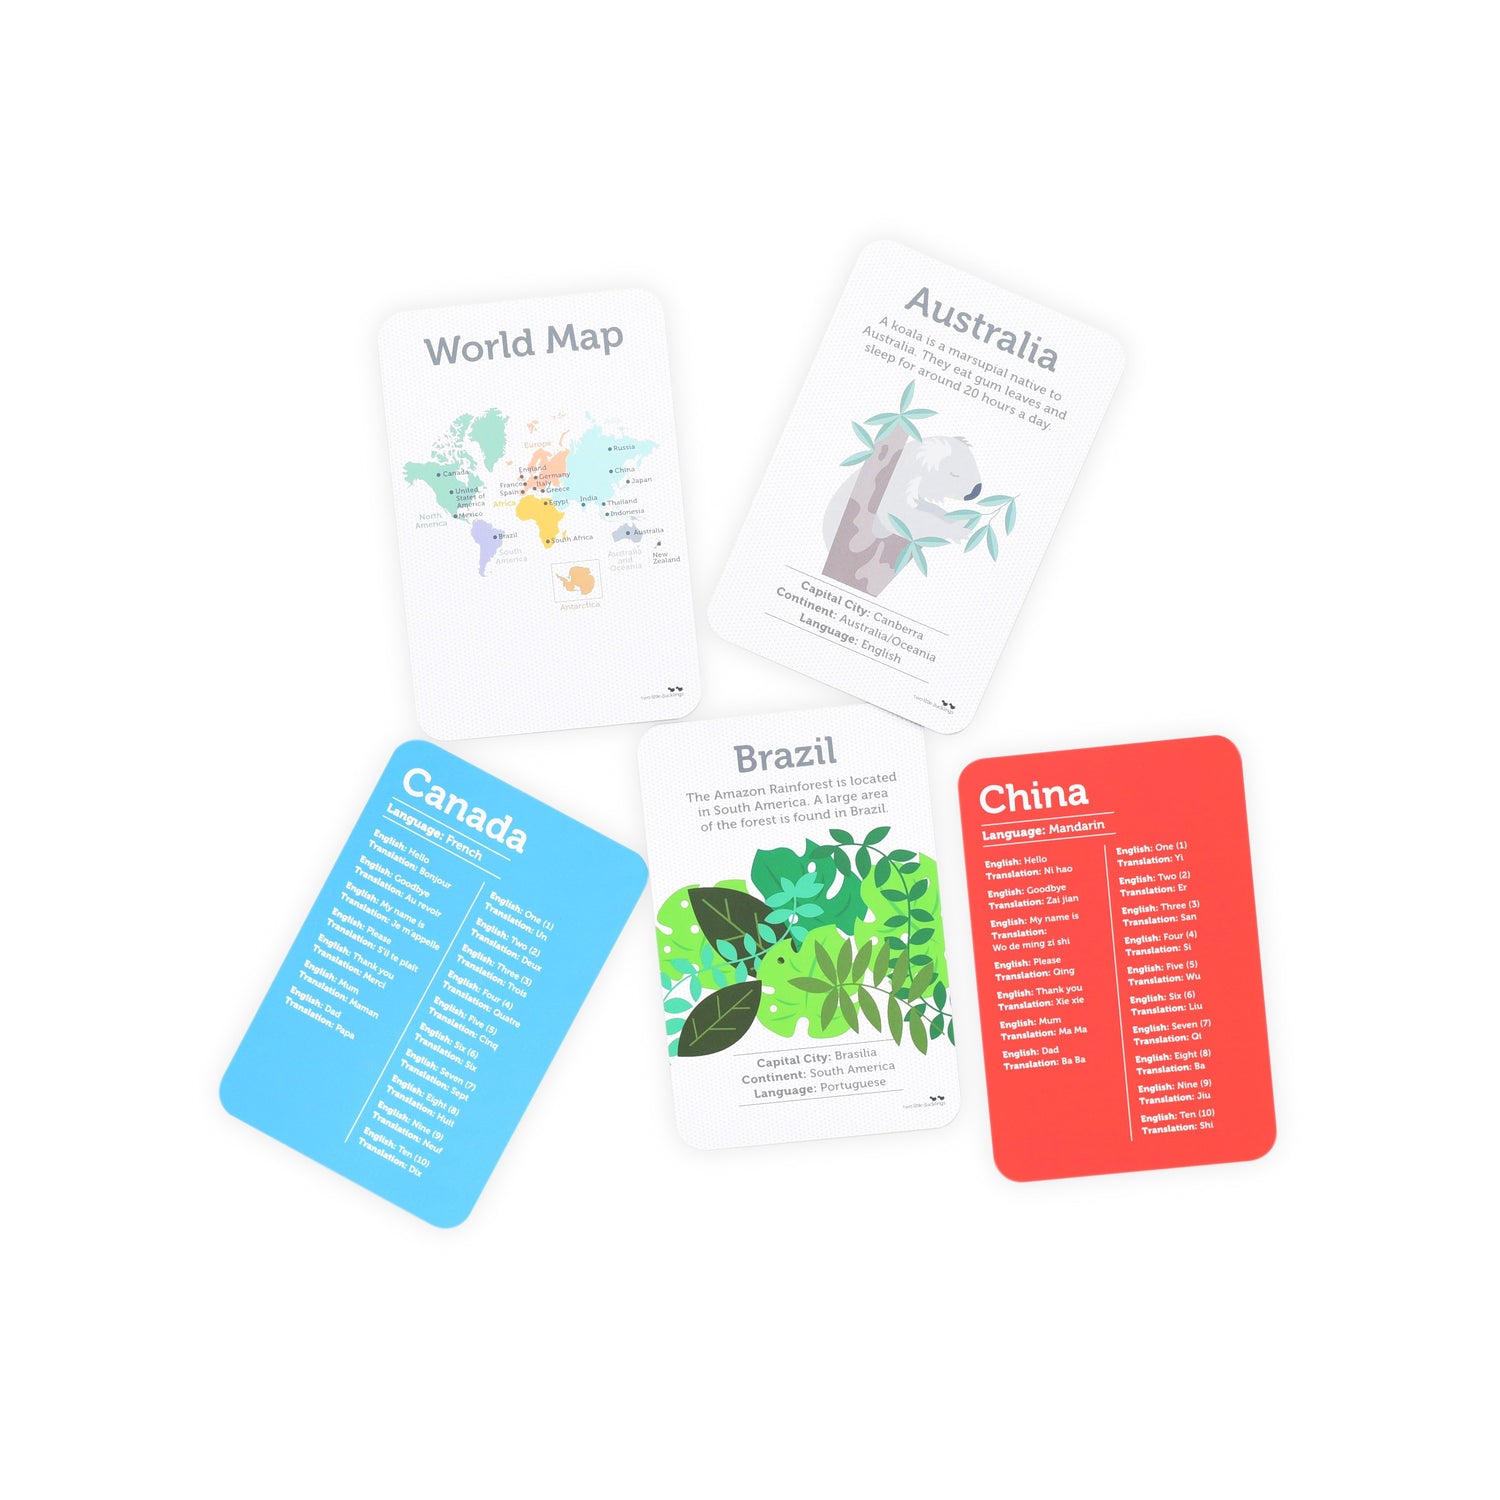 Country and Language Flash Cards